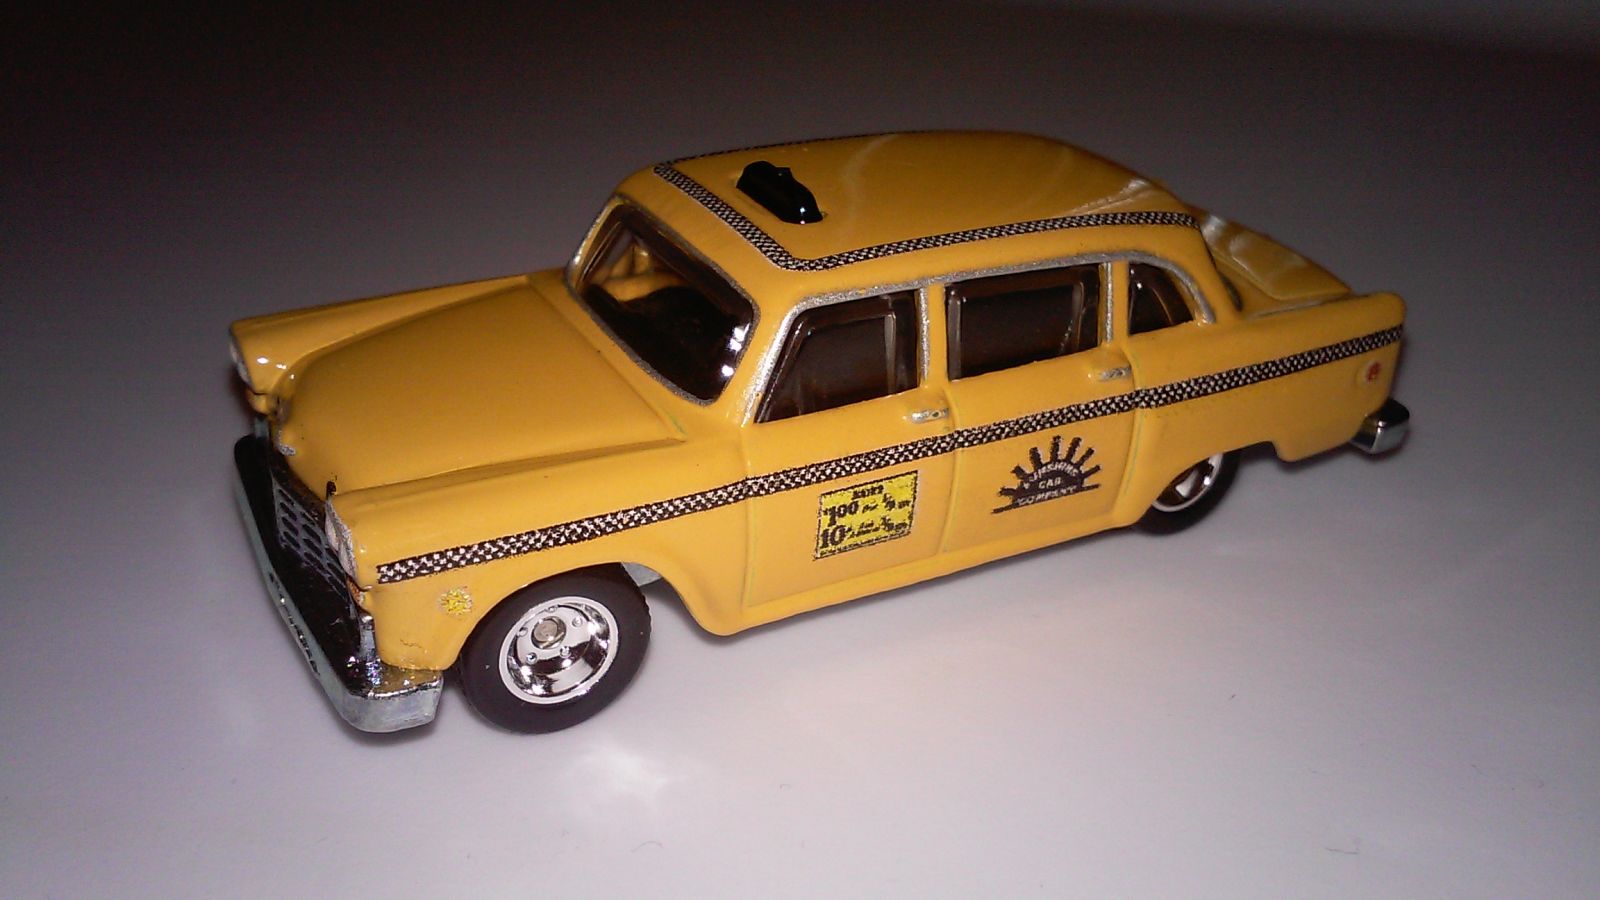 Illustration for article titled Hot Wheels 74 Checker Taxi Cab